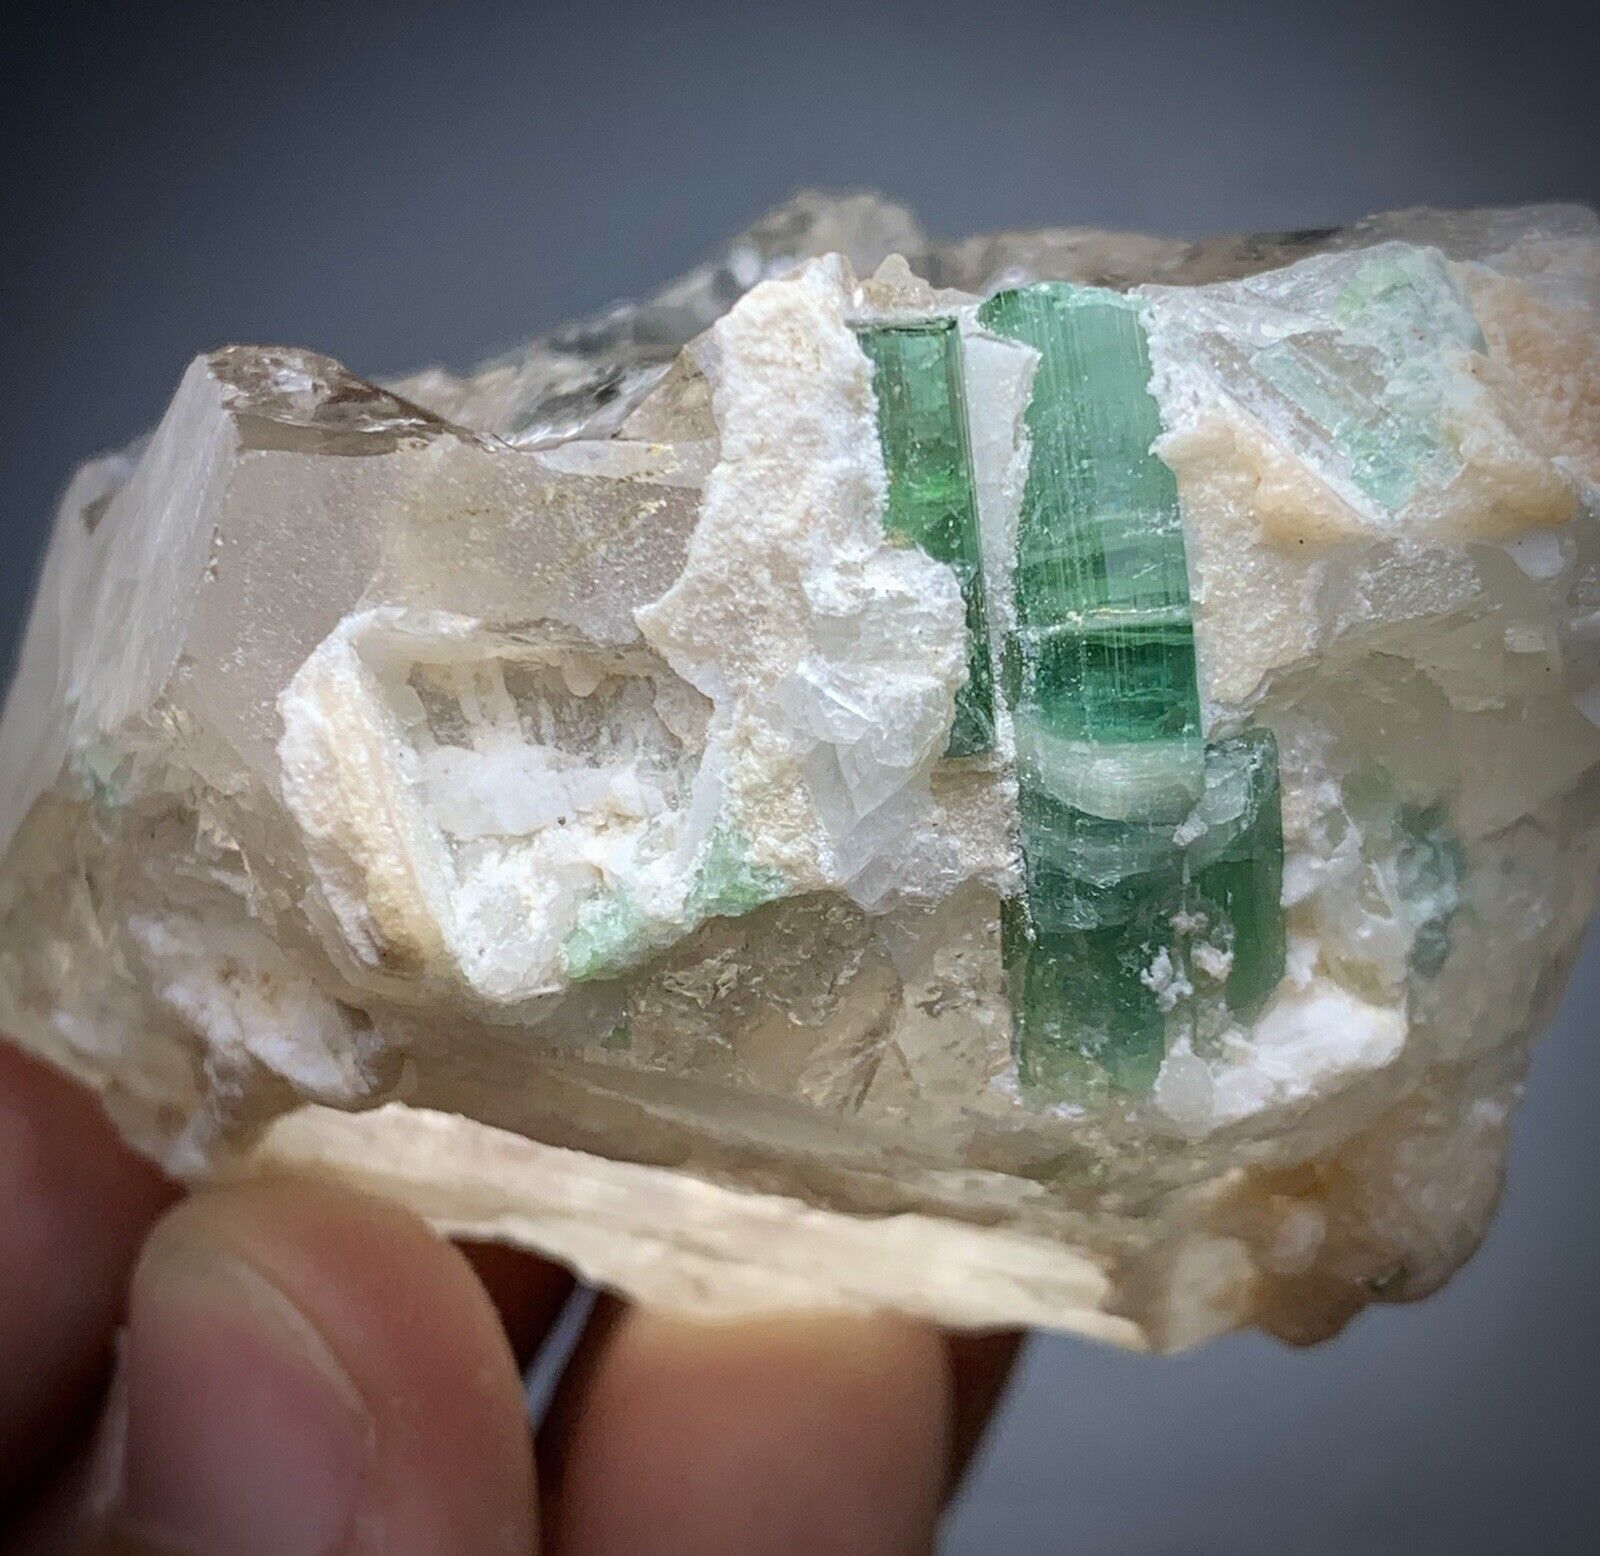 528 Ct Tourmaline Crystal With Quarts From Afghanistan.